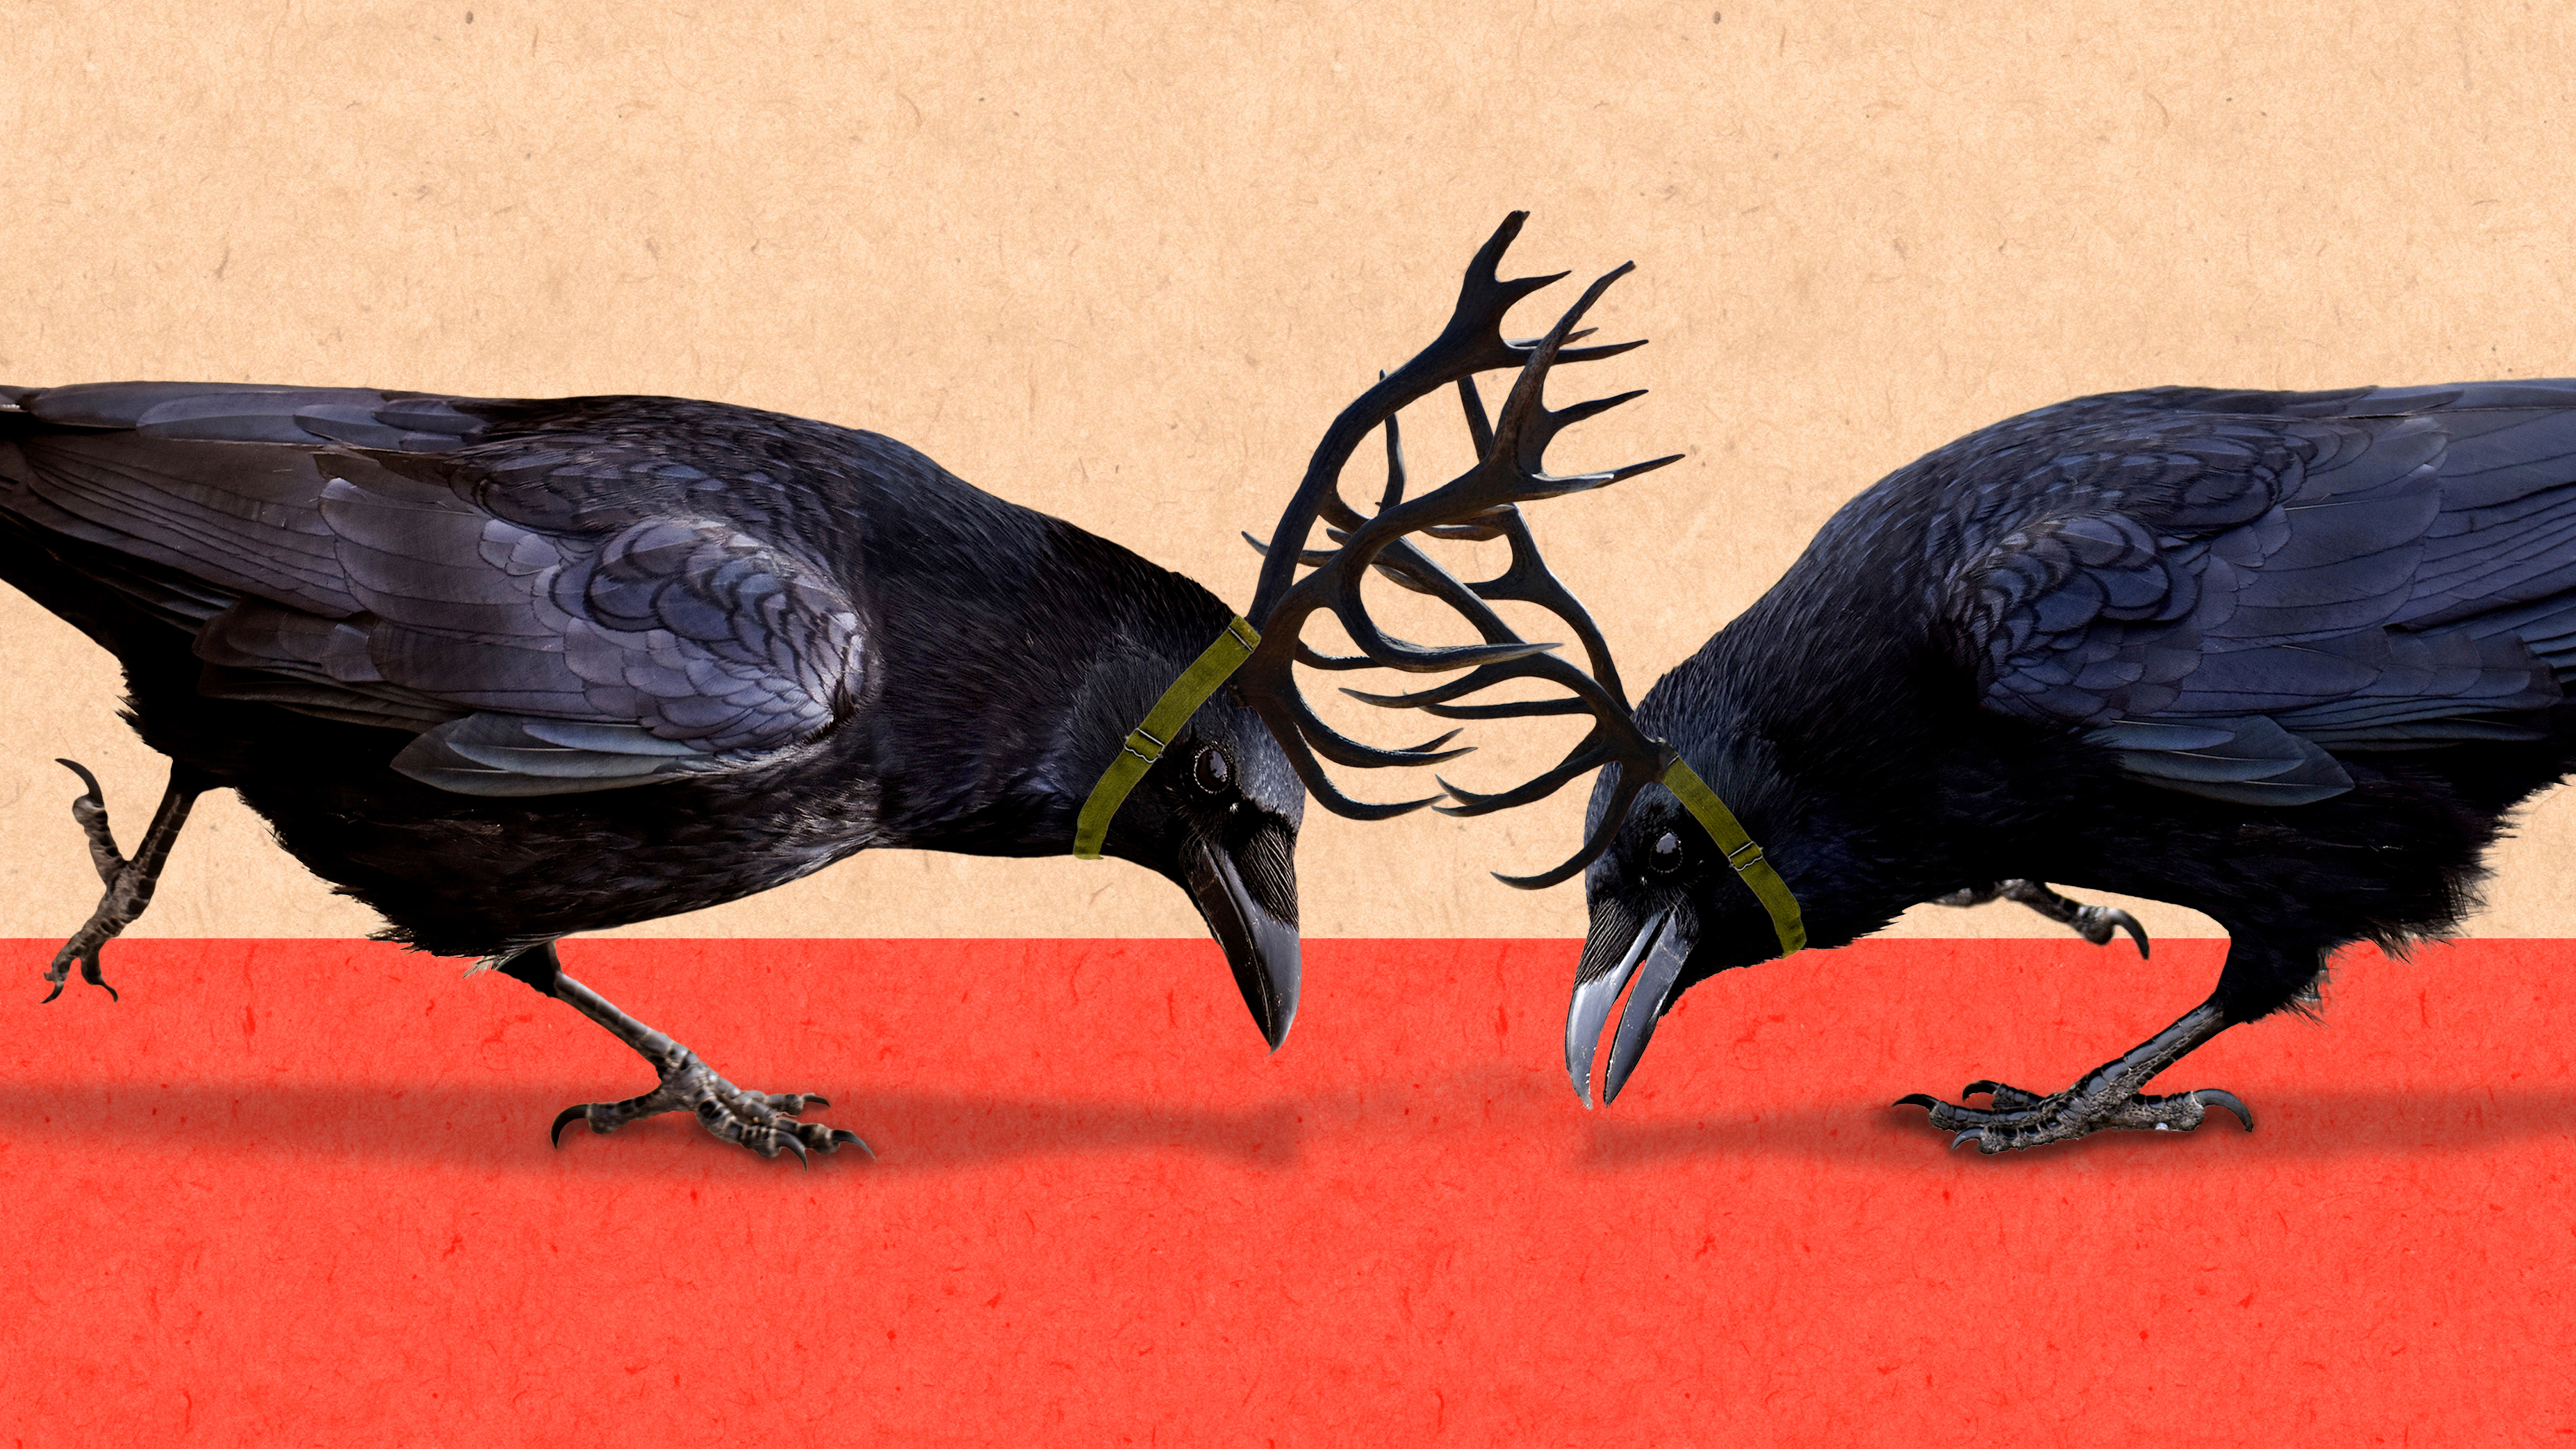 A digital illustration of two black crows with antlers strapped to their heads, locked in a headbutt. They stand on a red surface against a peach background